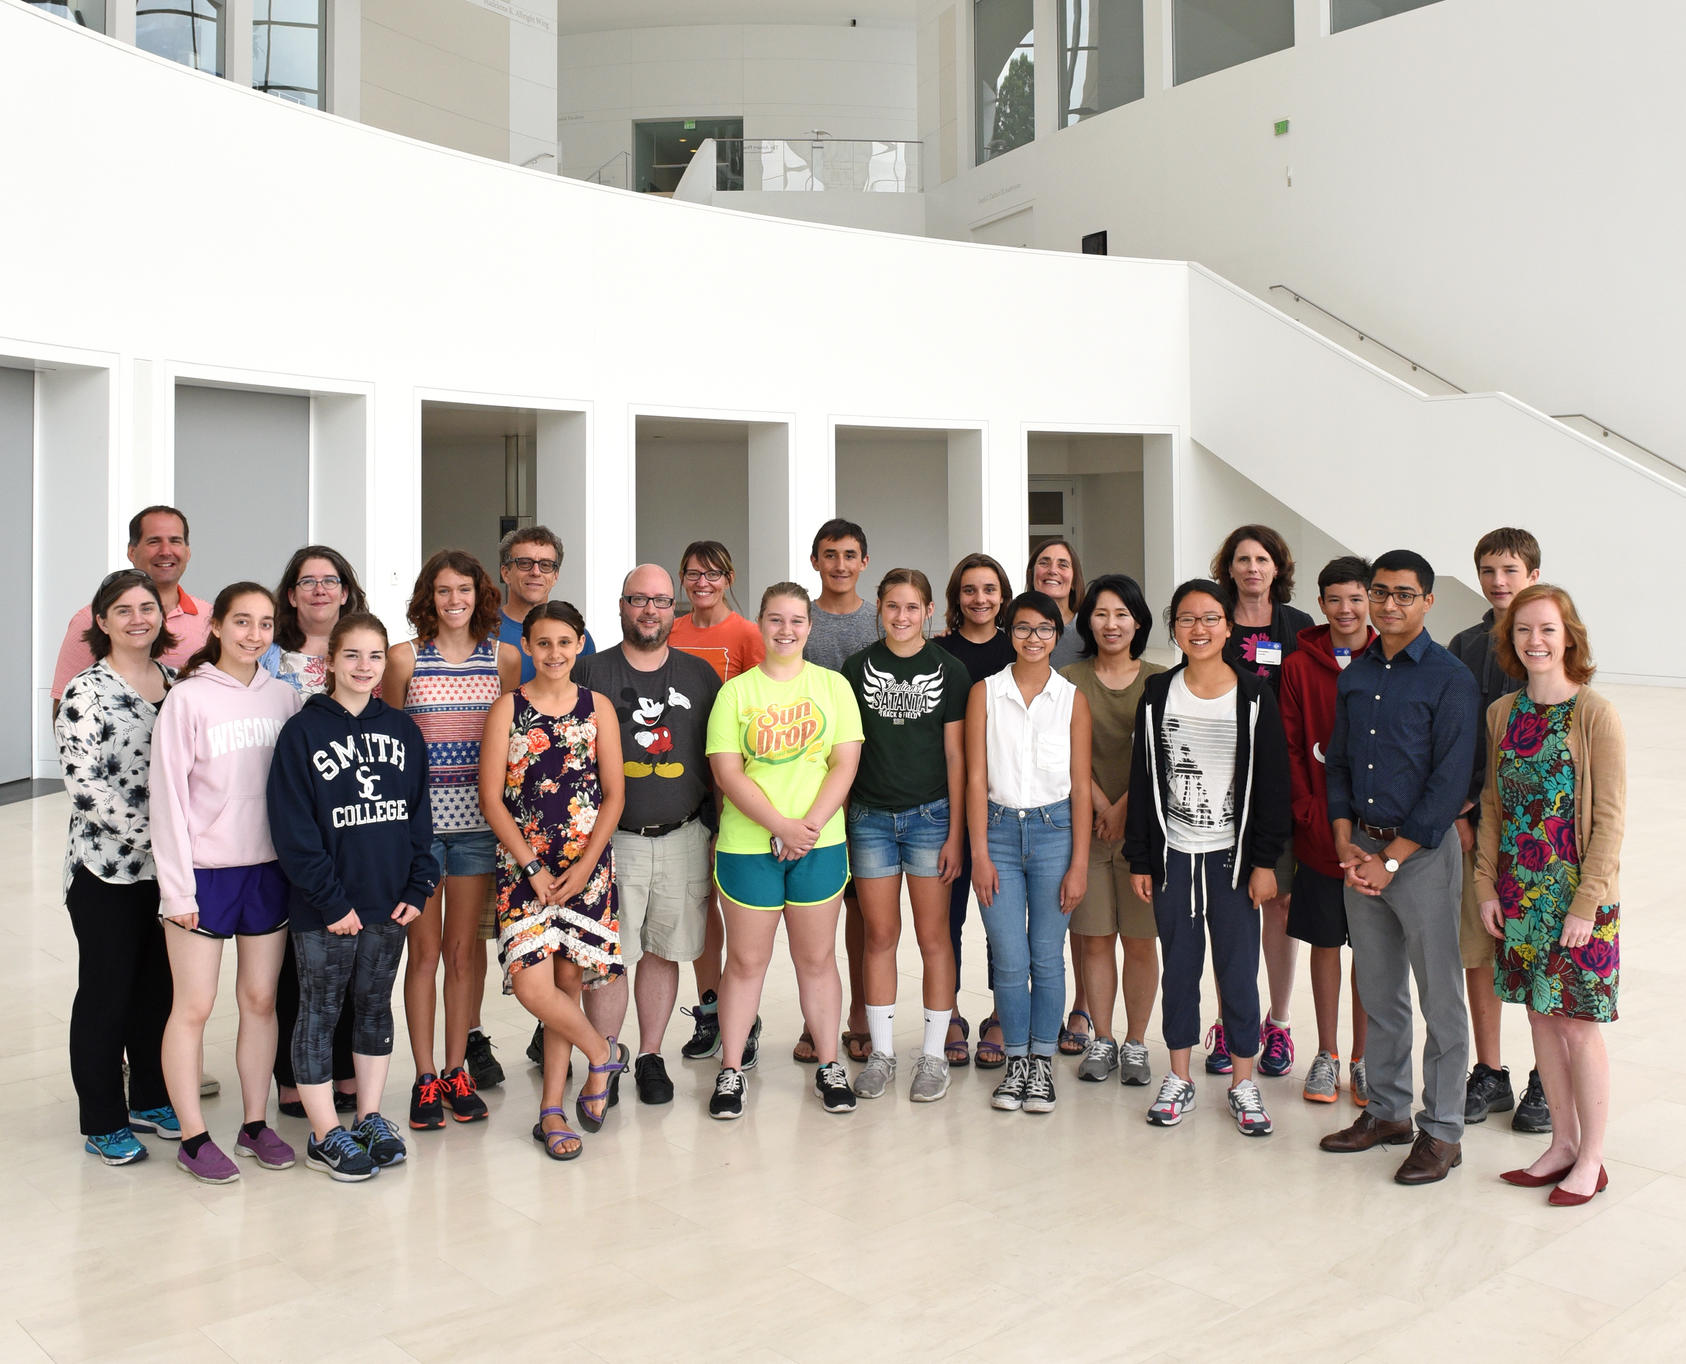 NHD participants visit the U.S. Institute of Peace during award week in June, 2016.